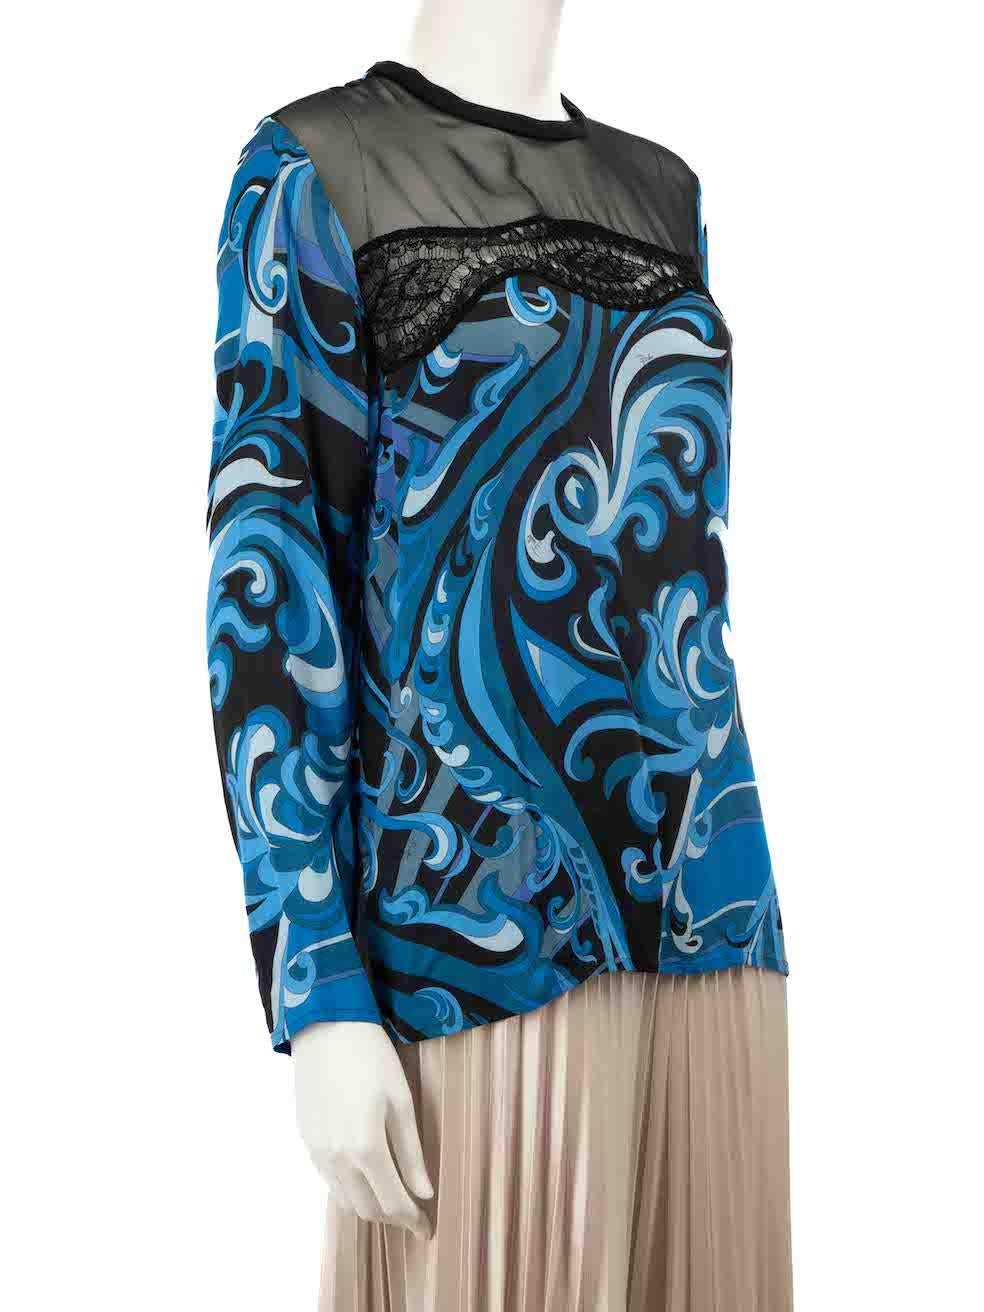 CONDITION is Very good. Hardly any visible wear to top is evident on this used Emilio Pucci designer resale item.
 
 Details
 Blue
 Silk
 Top
 Abstract pattern
 Long sleeves
 Round neck
 Sheer
 Lace panel
 Back button fastening
 
 
 Made in Italy
 
